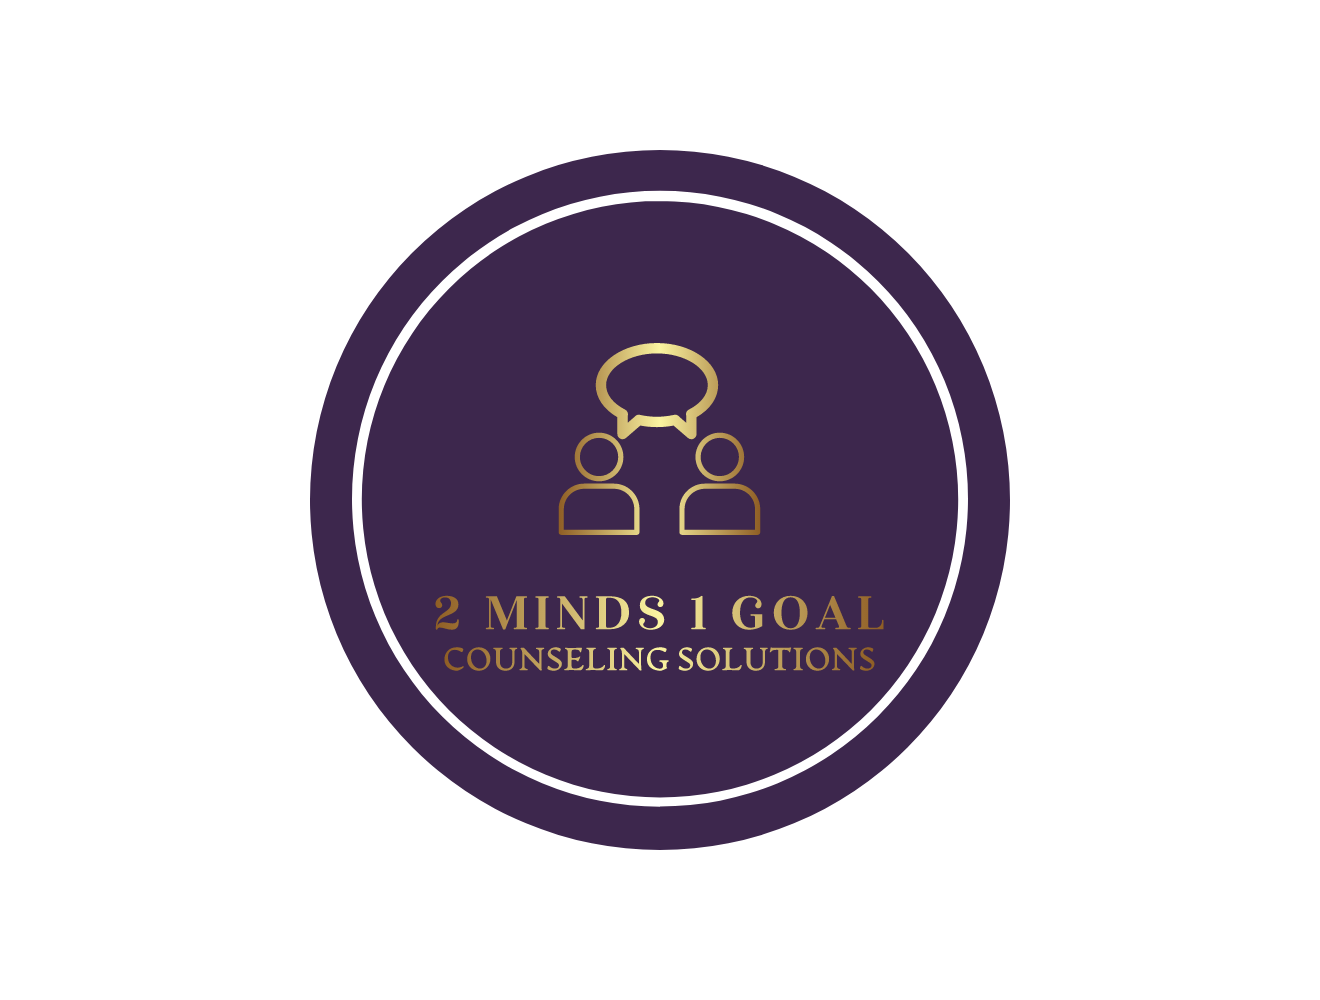 2 Minds 1 Goal Counseling Solutions LLC